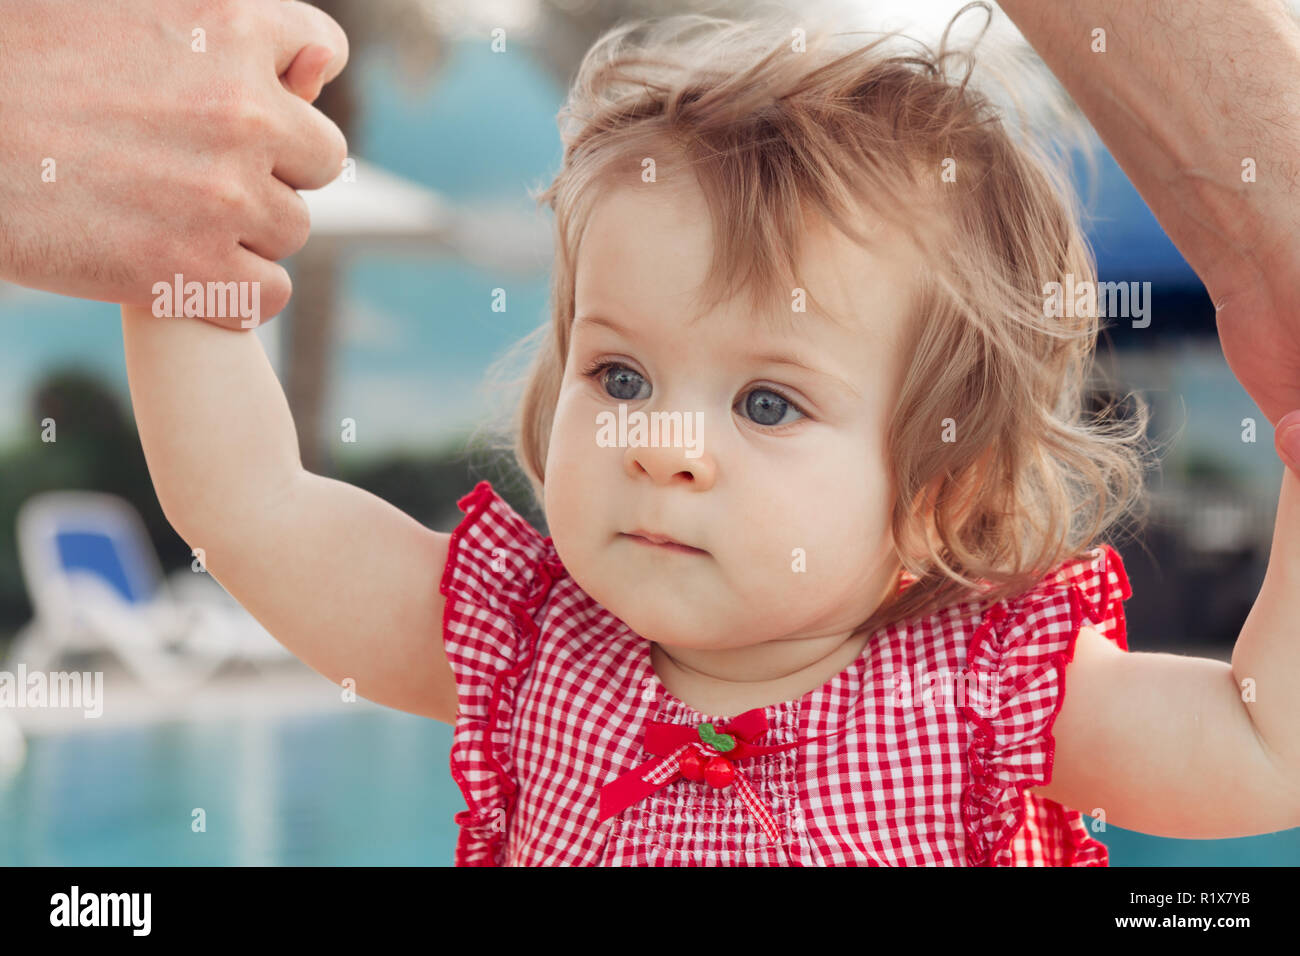 Adorable baby girl holding father's hands while learning to walk outdoors. Swimming pool background. Baby looking up Stock Photo